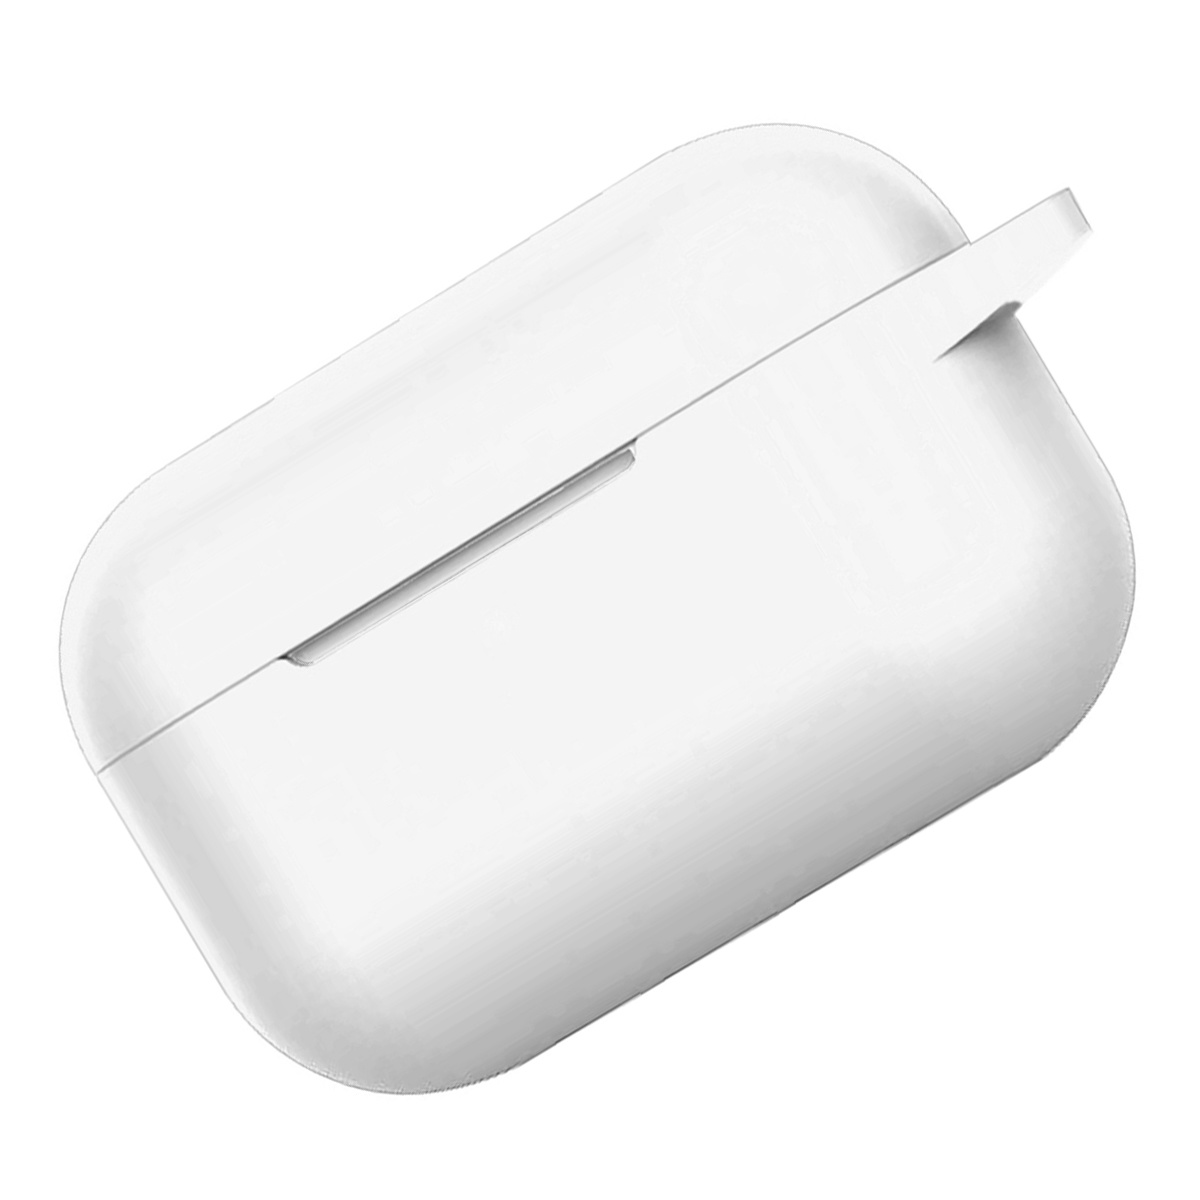 Nomfy Hoes Geschikt voor AirPods Pro Hoesje Siliconen Case - Hoesje Geschikt voor AirPods Pro Case Hoes - Transparant